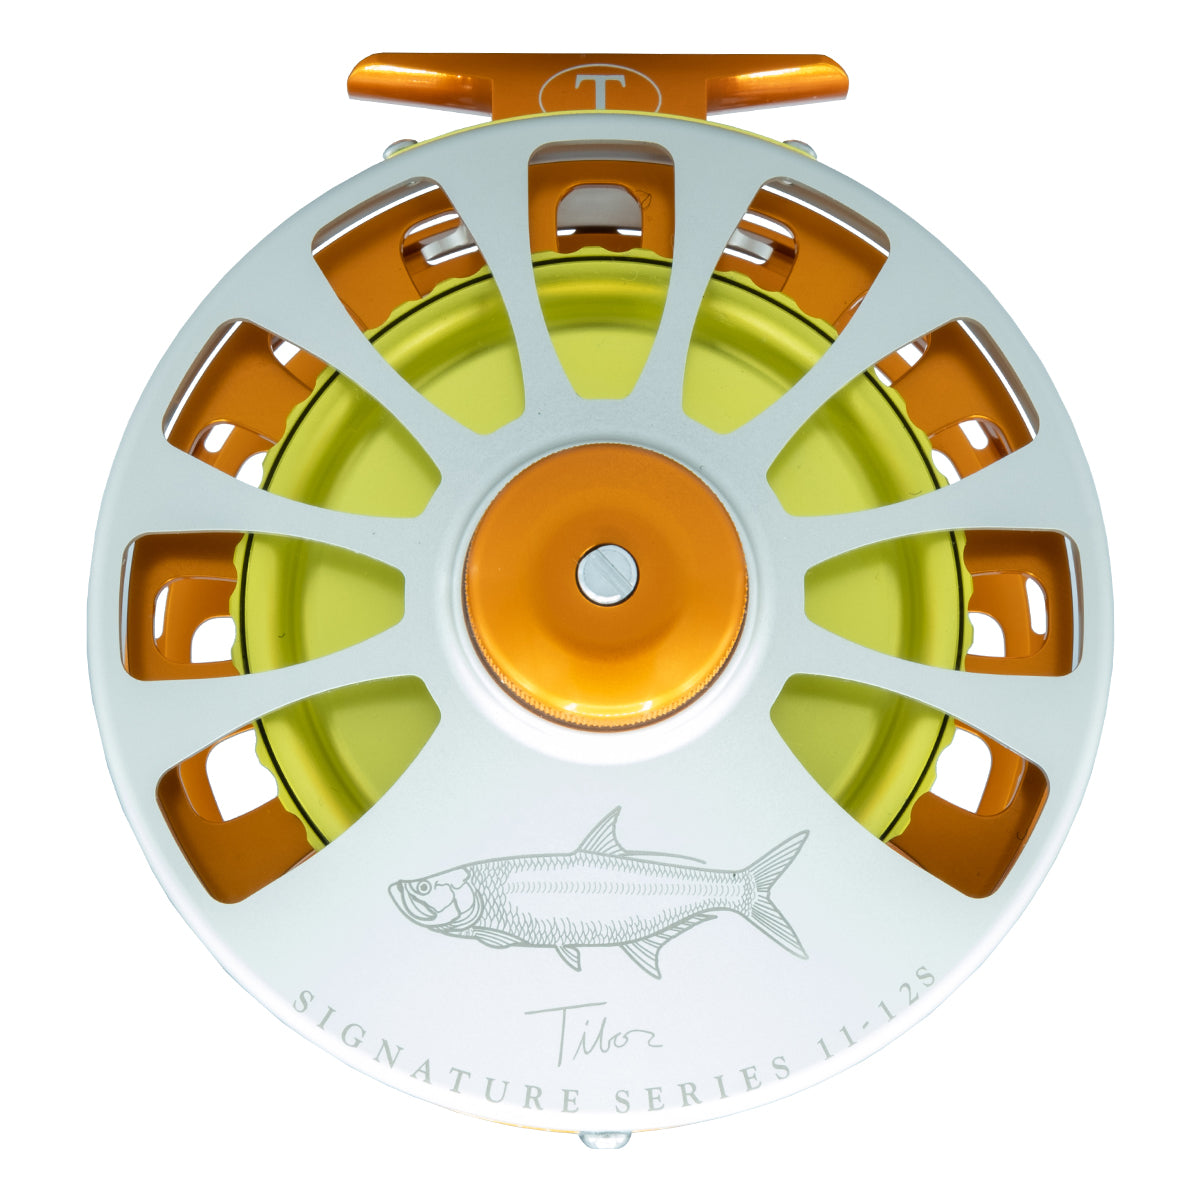 Tibor Signature 11/12S Fly Reel-frost silver